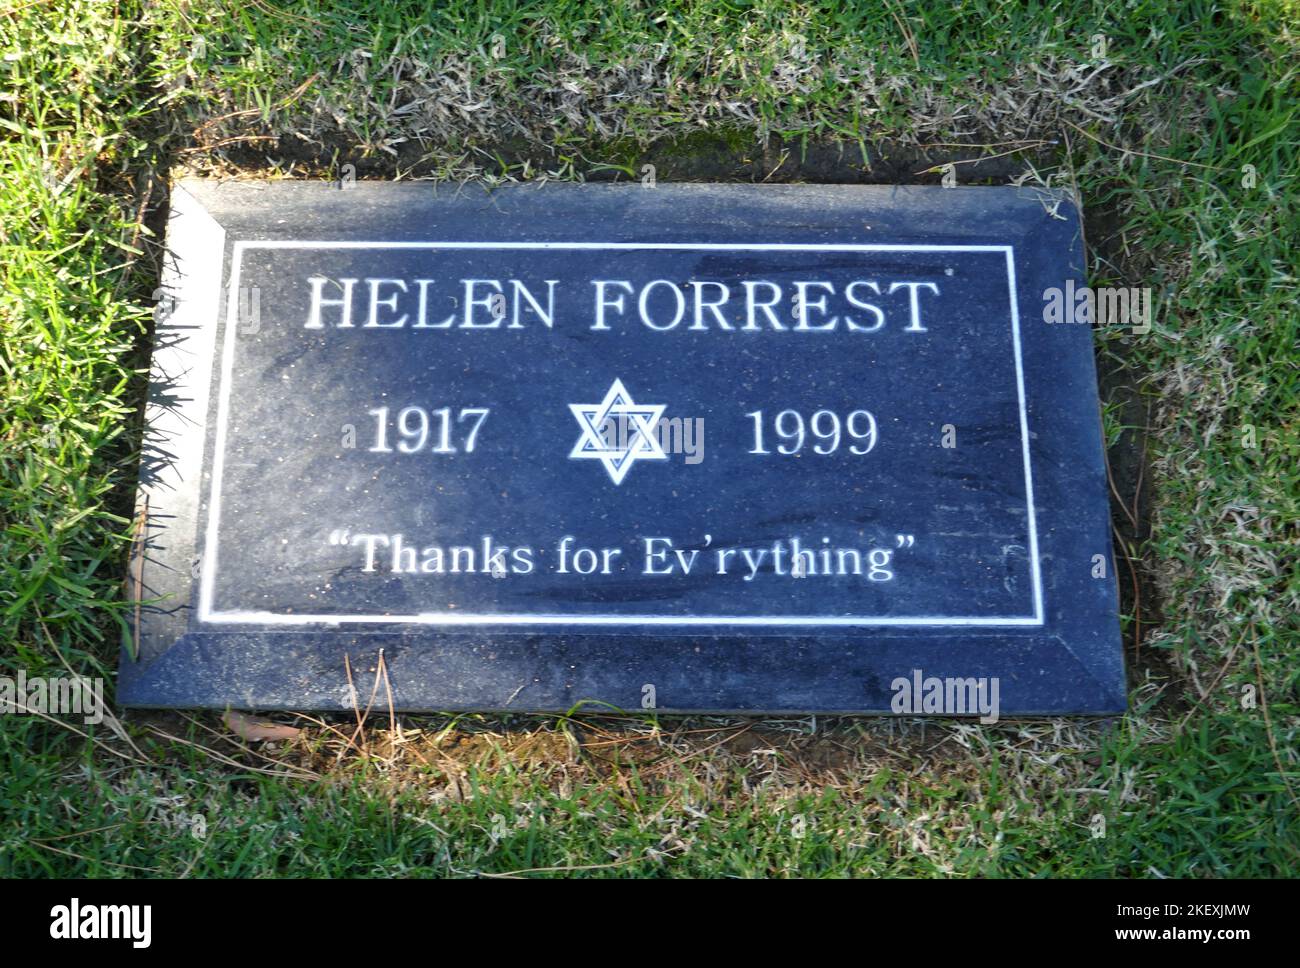 Los Angeles, California, USA 10th November 2022 Actress Helen Forrest's Grave at Mount Sinai Memorial Park on November 10, 2022 in Los Angeles, California, USA. Photo by Barry King/Alamy Stock Photo Stock Photo